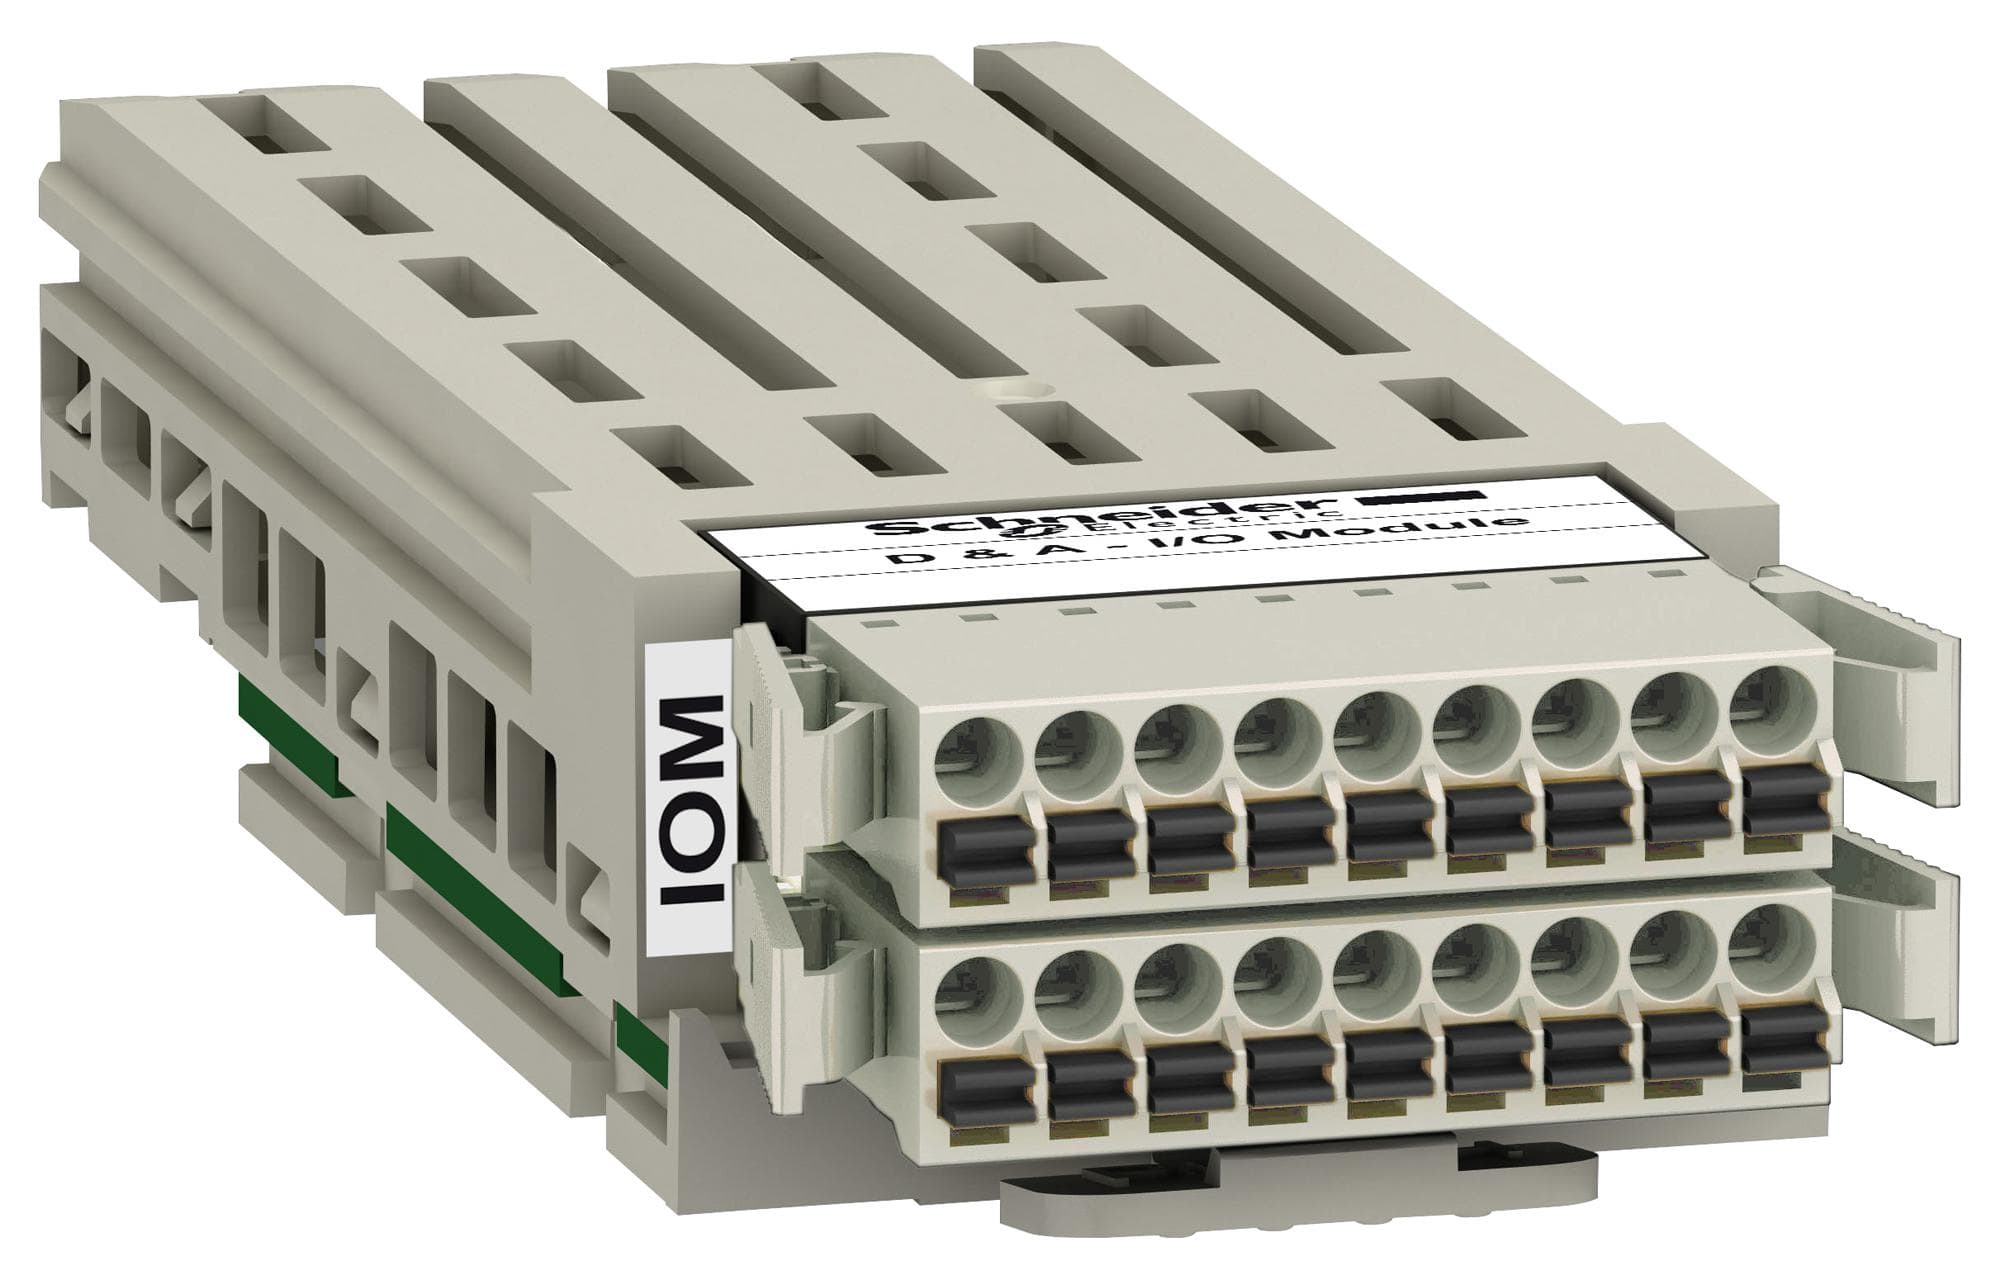 VW3A3203 EXTENDED I/O MODULE, VAR SPEED DRIVE SCHNEIDER ELECTRIC